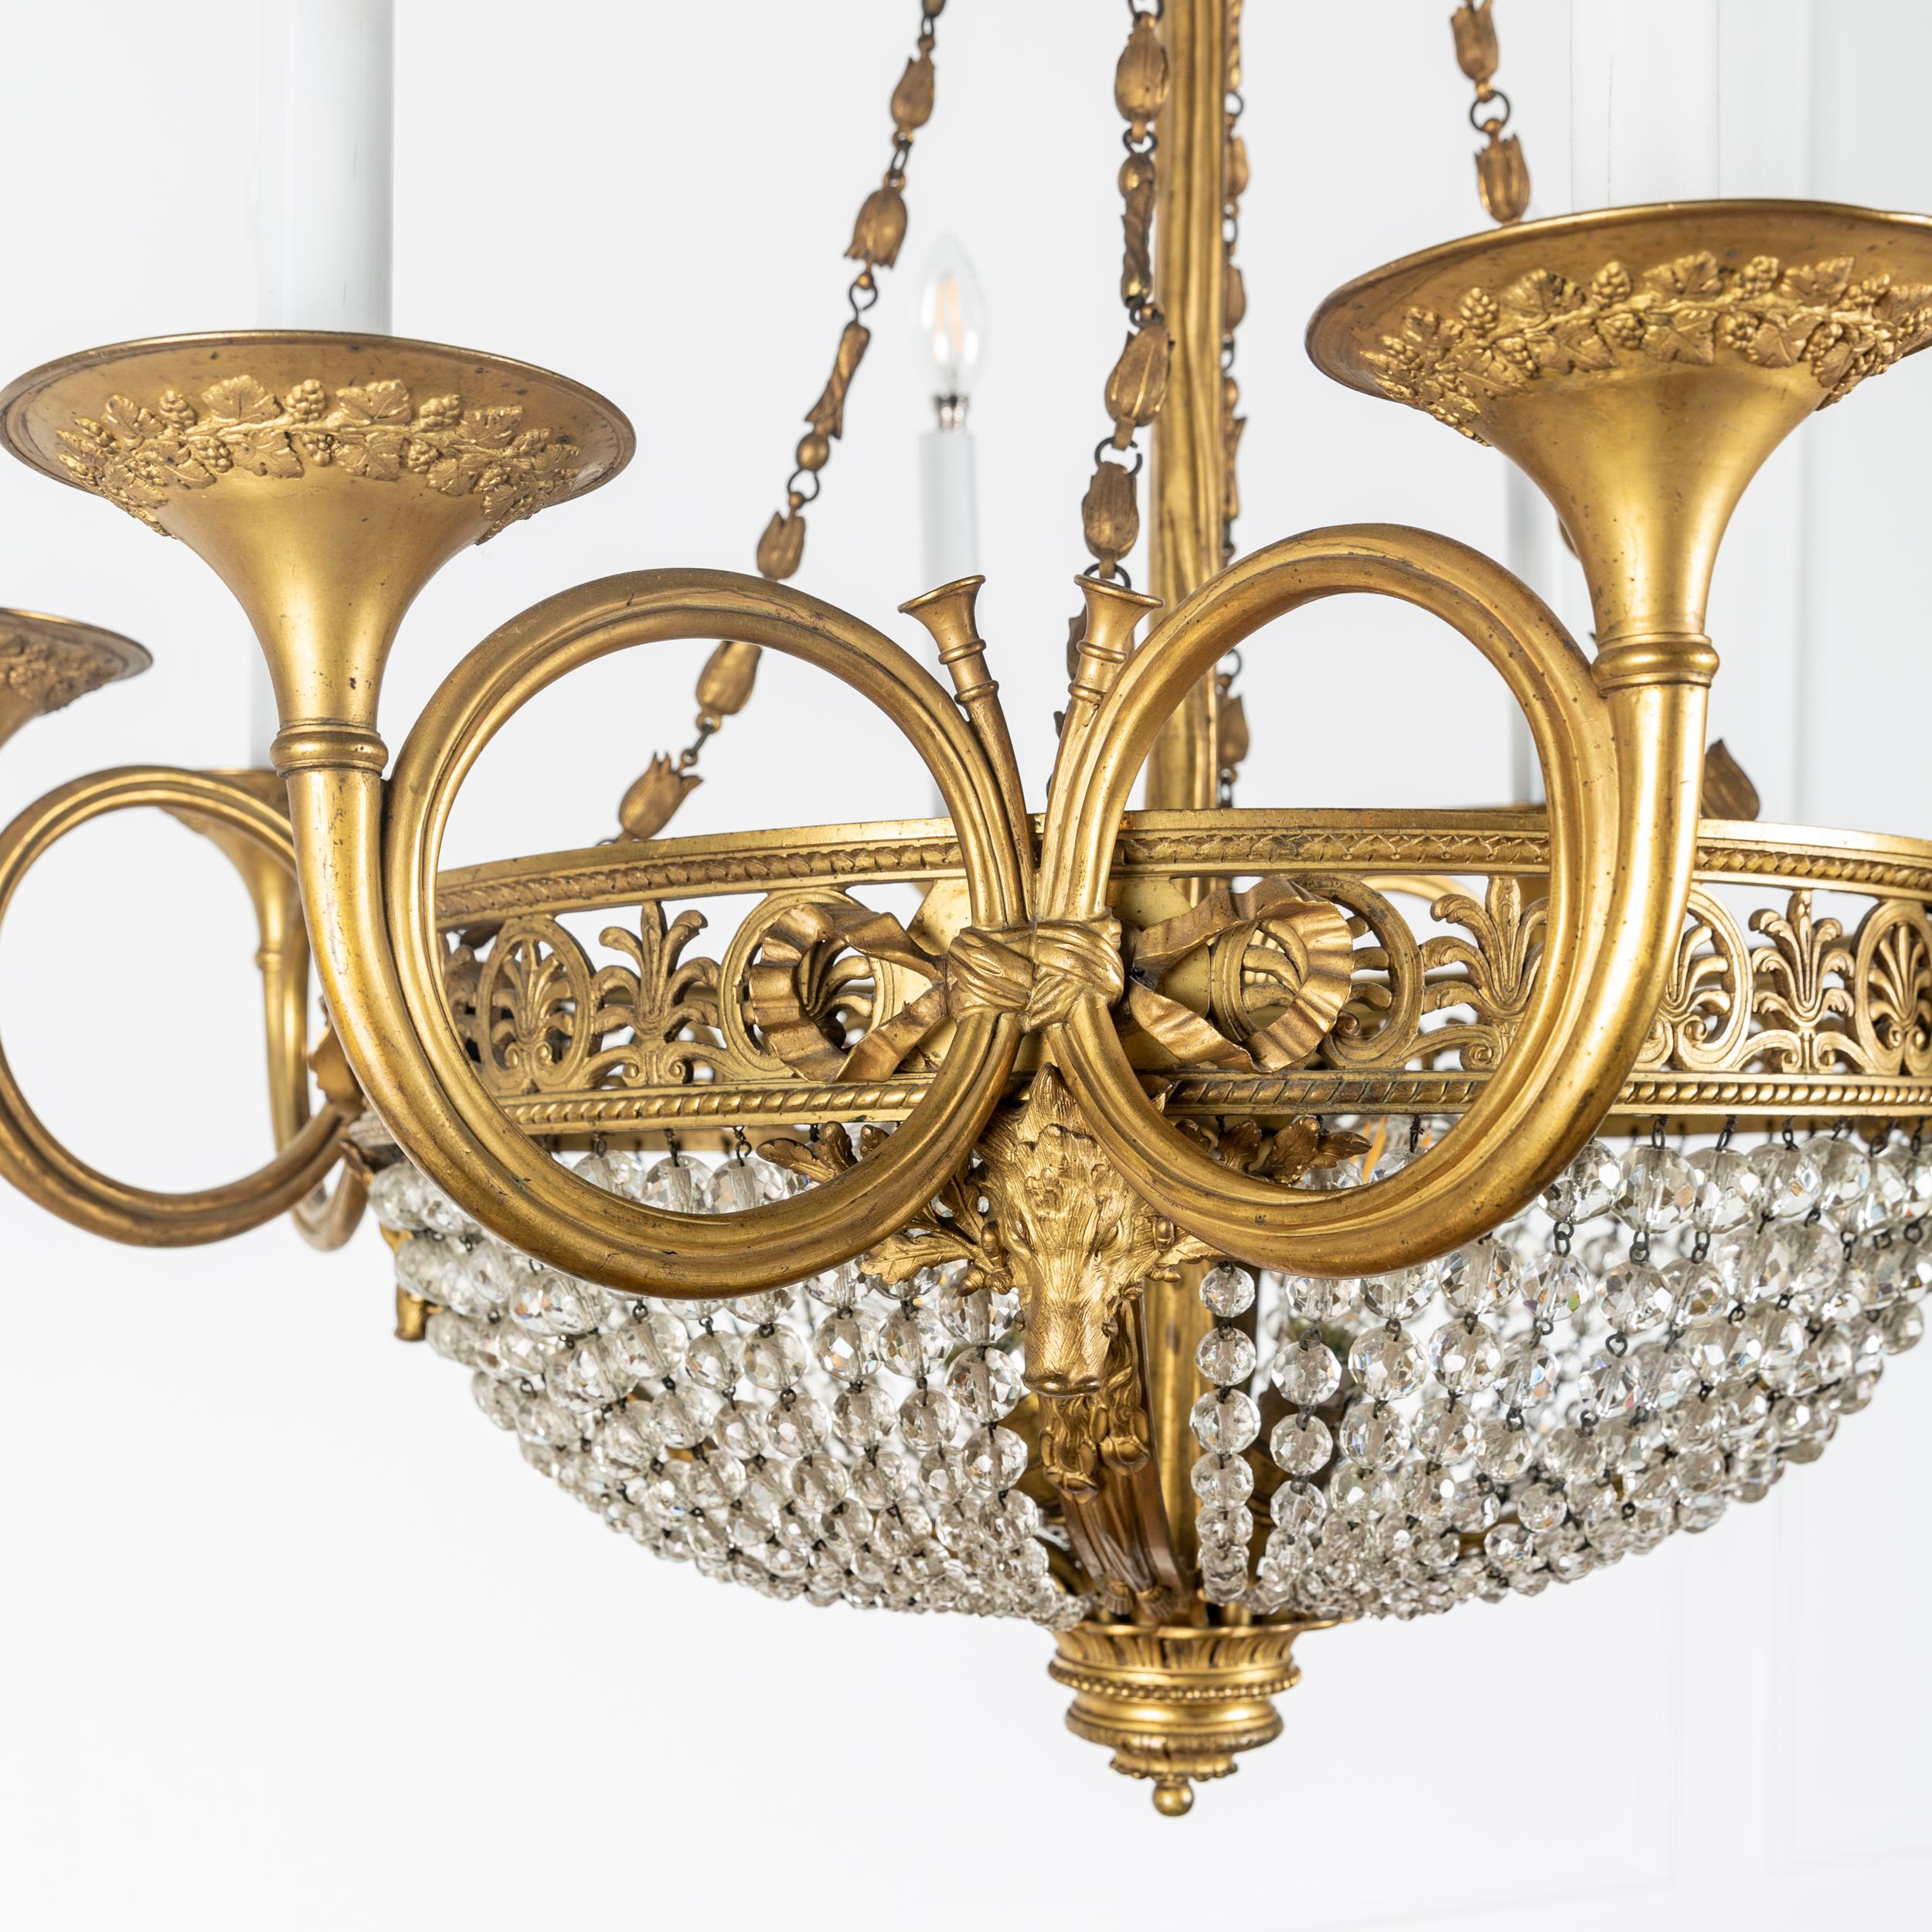 Large French Directoire Period Bronze and Crystal Twelve Light Chandelier In Good Condition For Sale In Toorak, VIC